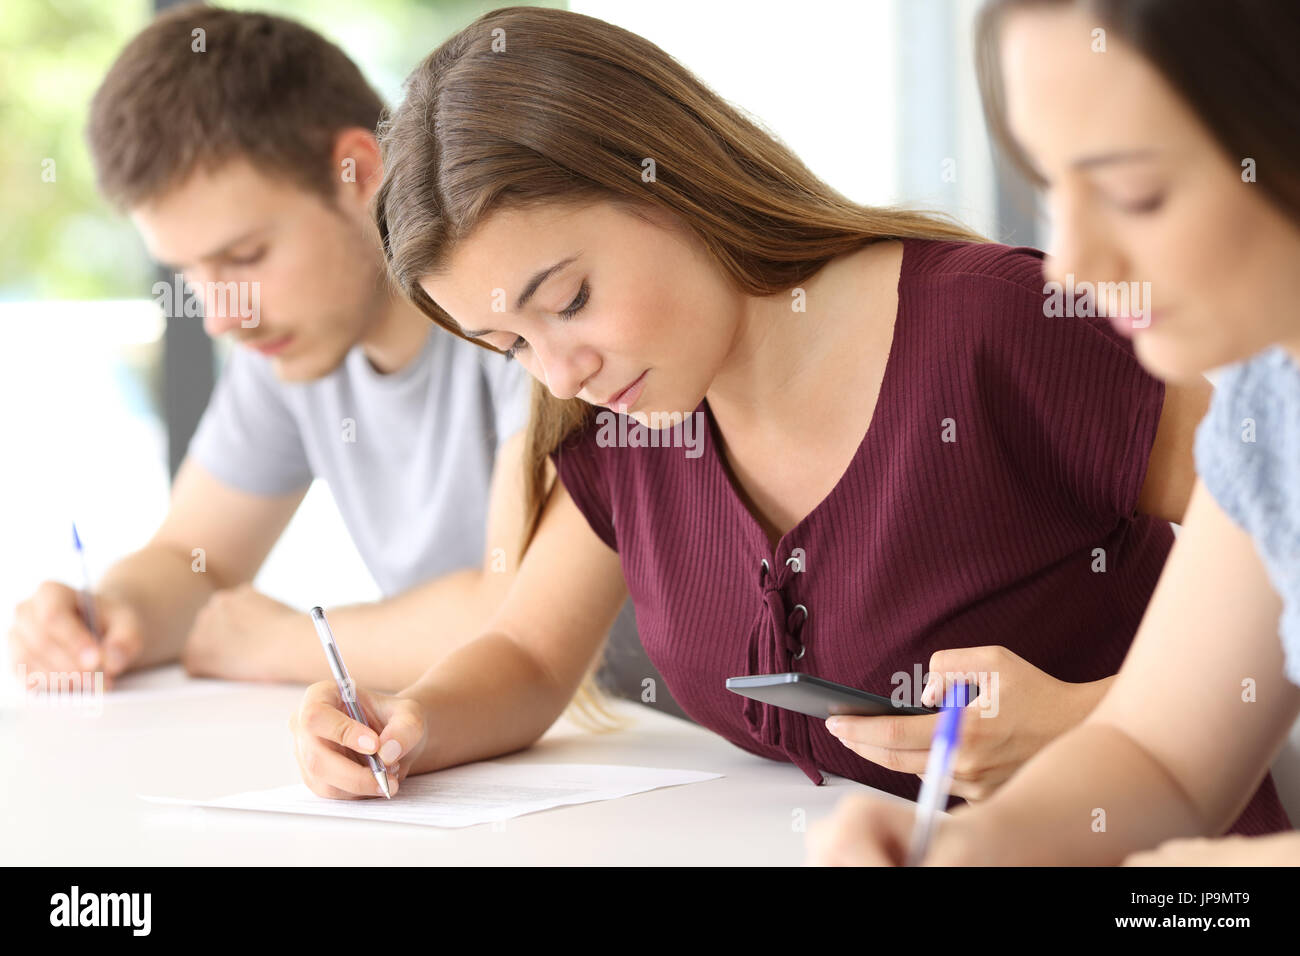 Student using a smart phone to copy during an exam in a classroom Stock Photo